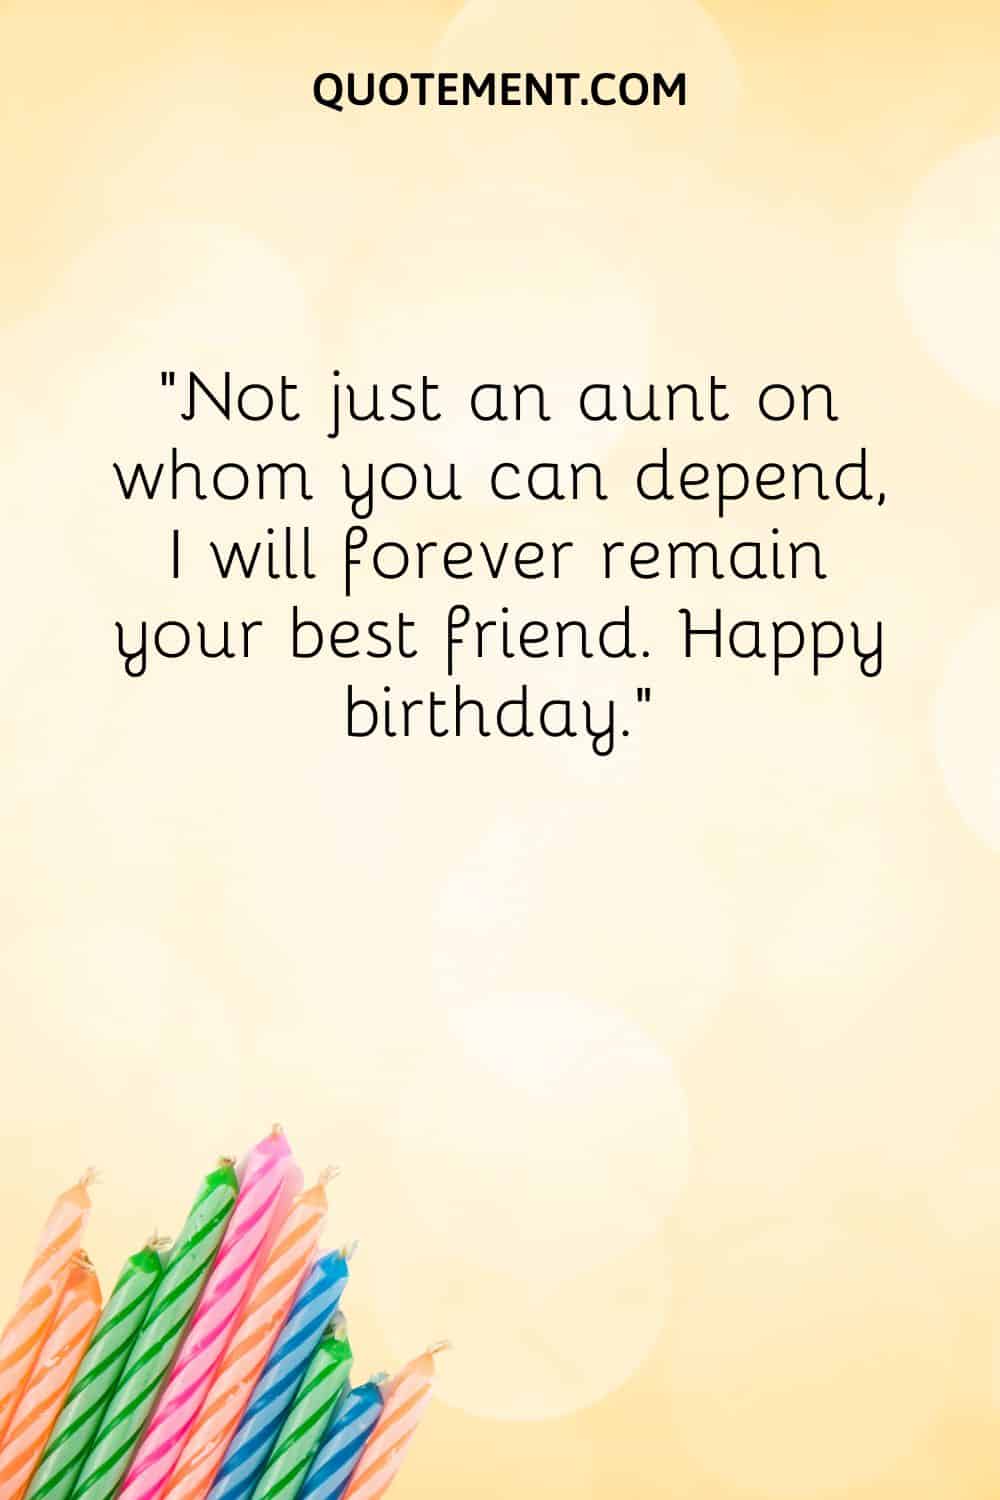 “Not just an aunt on whom you can depend, I will forever remain your best friend. Happy birthday.”